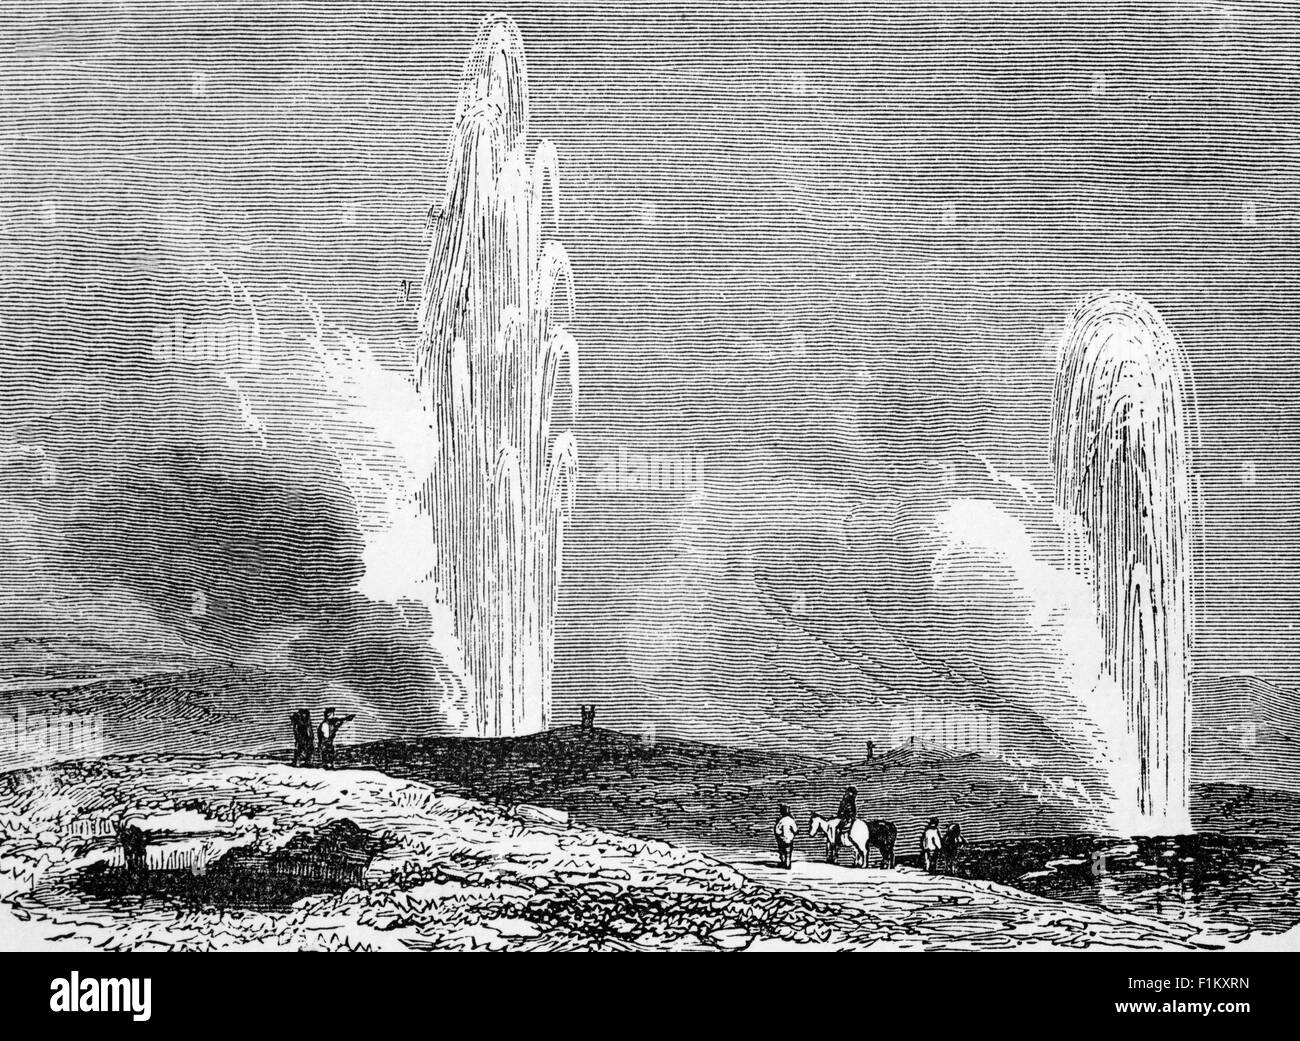 A 19th Century illustration of the Great Geysir in southwestern Iceland. It lies in the Haukadalur valley on the slopes of Laugarfjall hill and its eruptions can hurl boiling water up to 70 metres (230 ft) in the air. However, eruptions may be infrequent, and have in the past stopped altogether for years at a time. Stock Photo